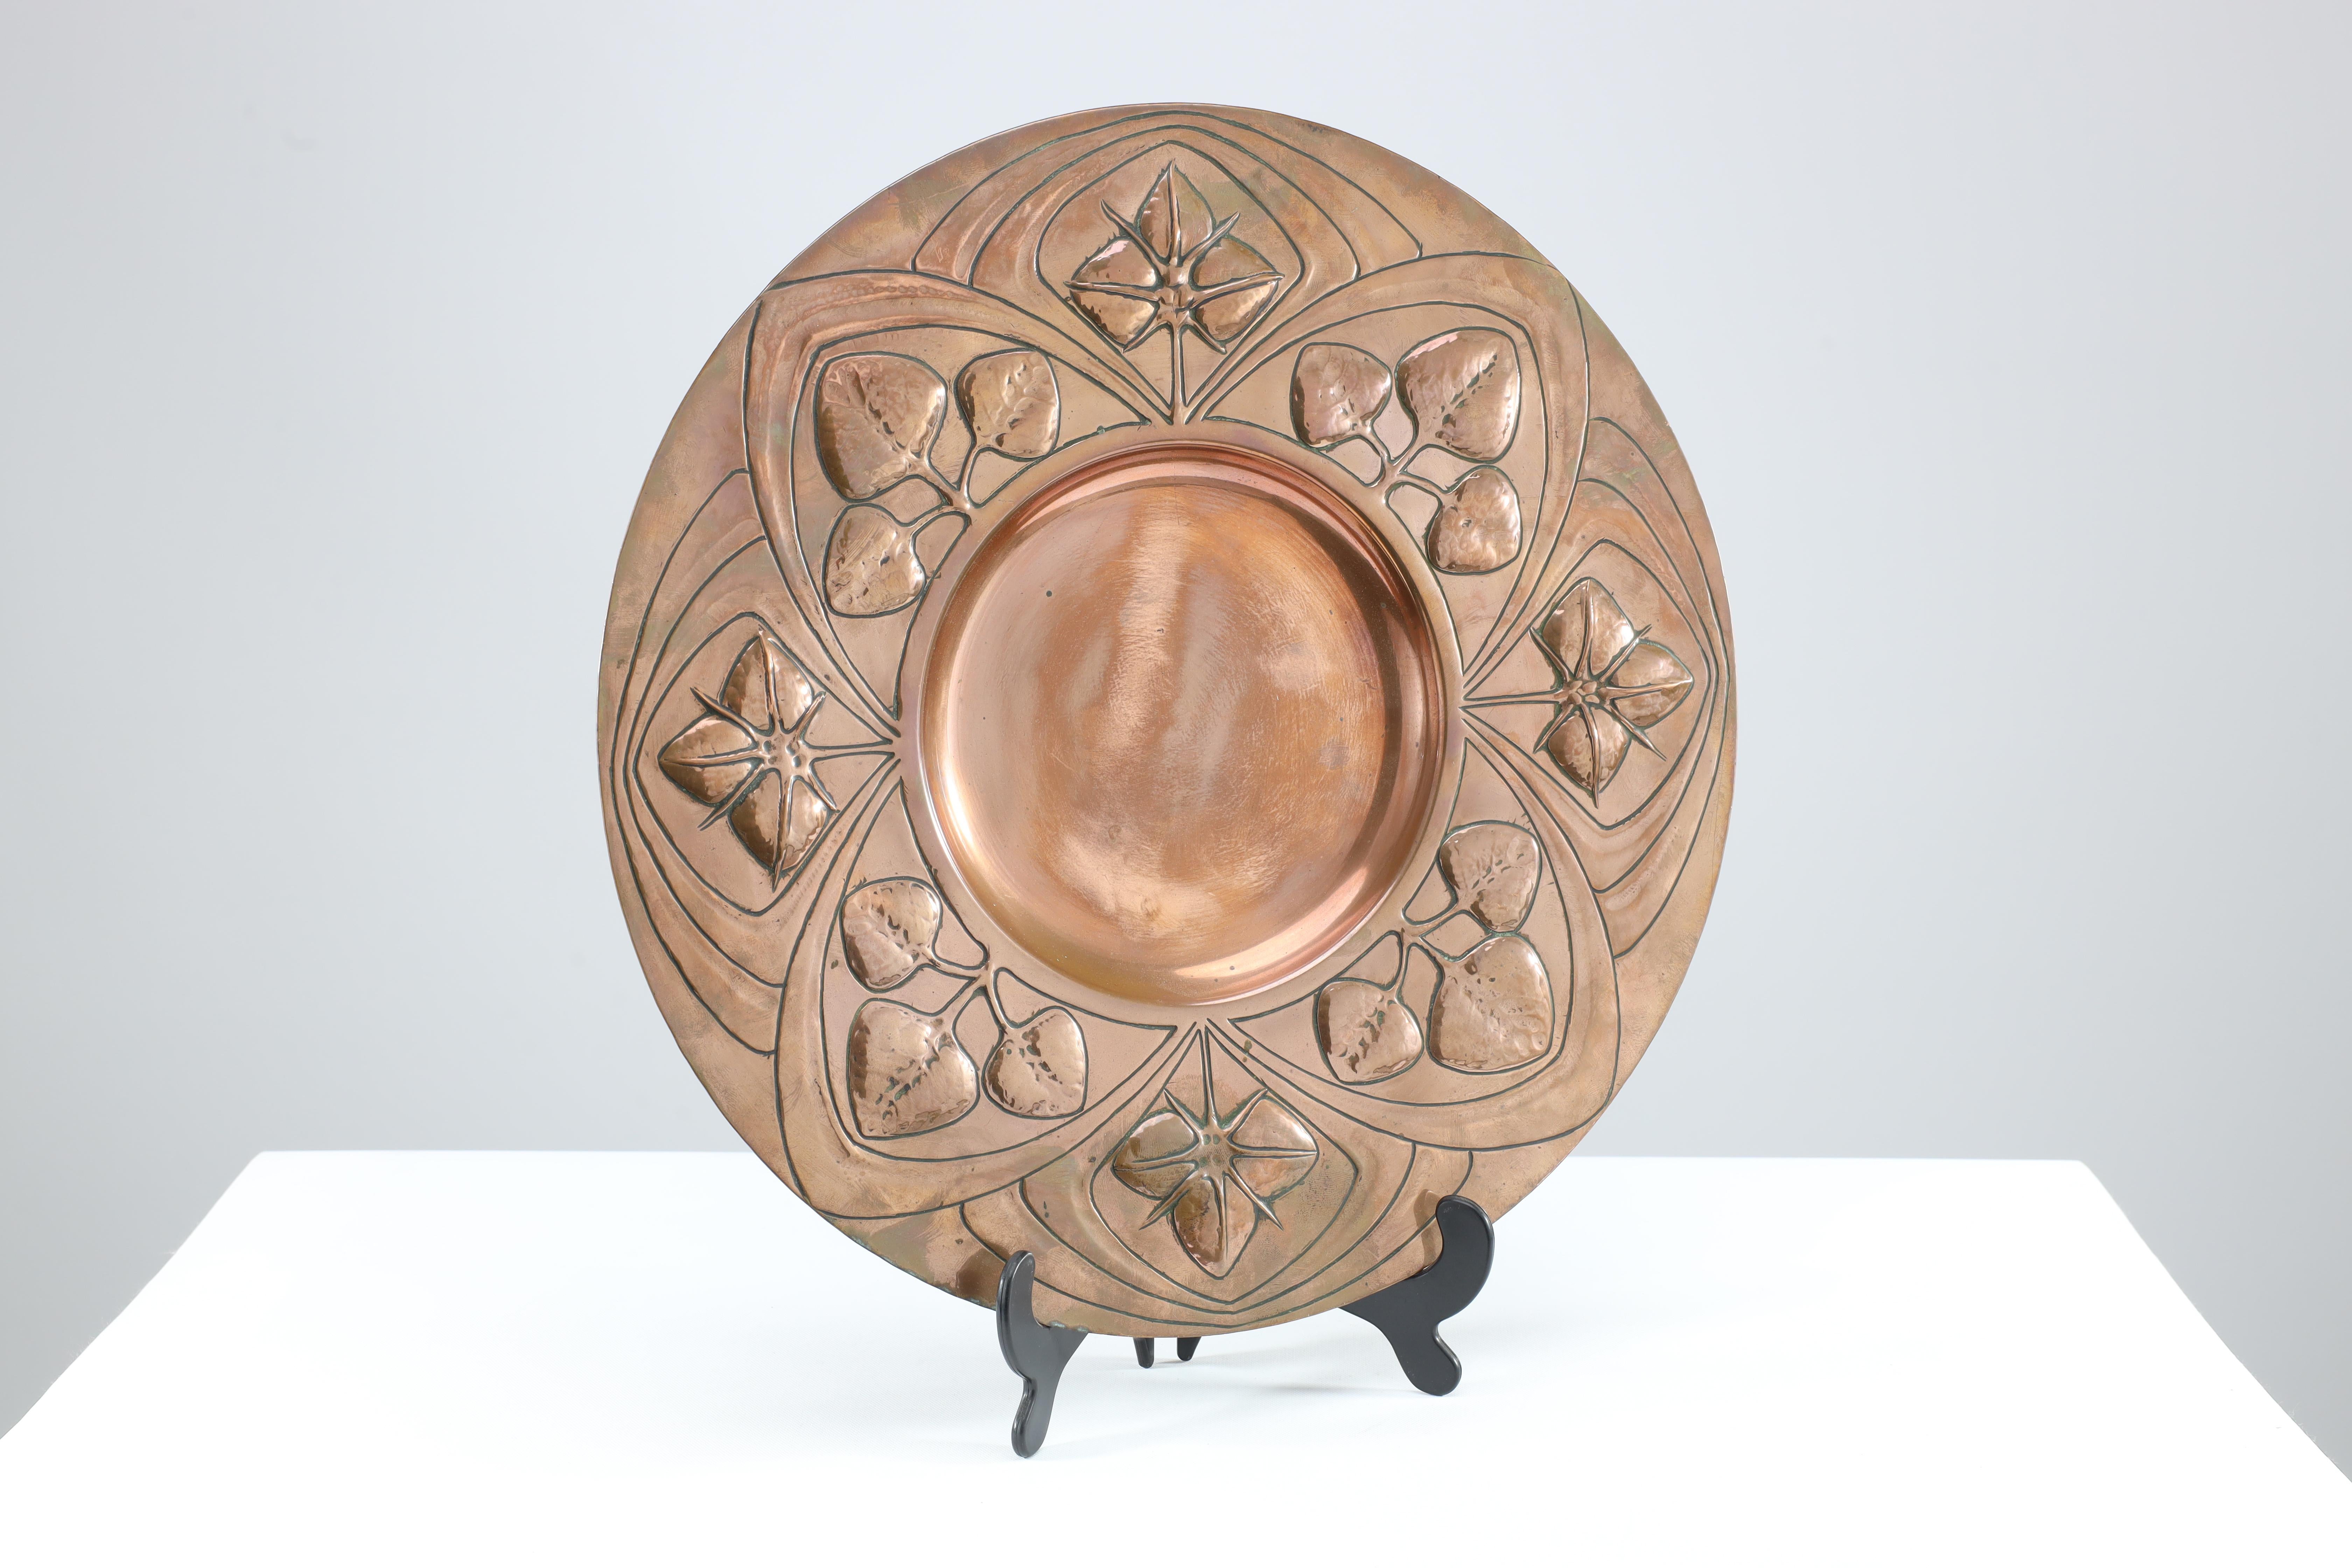 A good quality well executed Arts and Crafts copper wall plate with floral decoration around the centre.